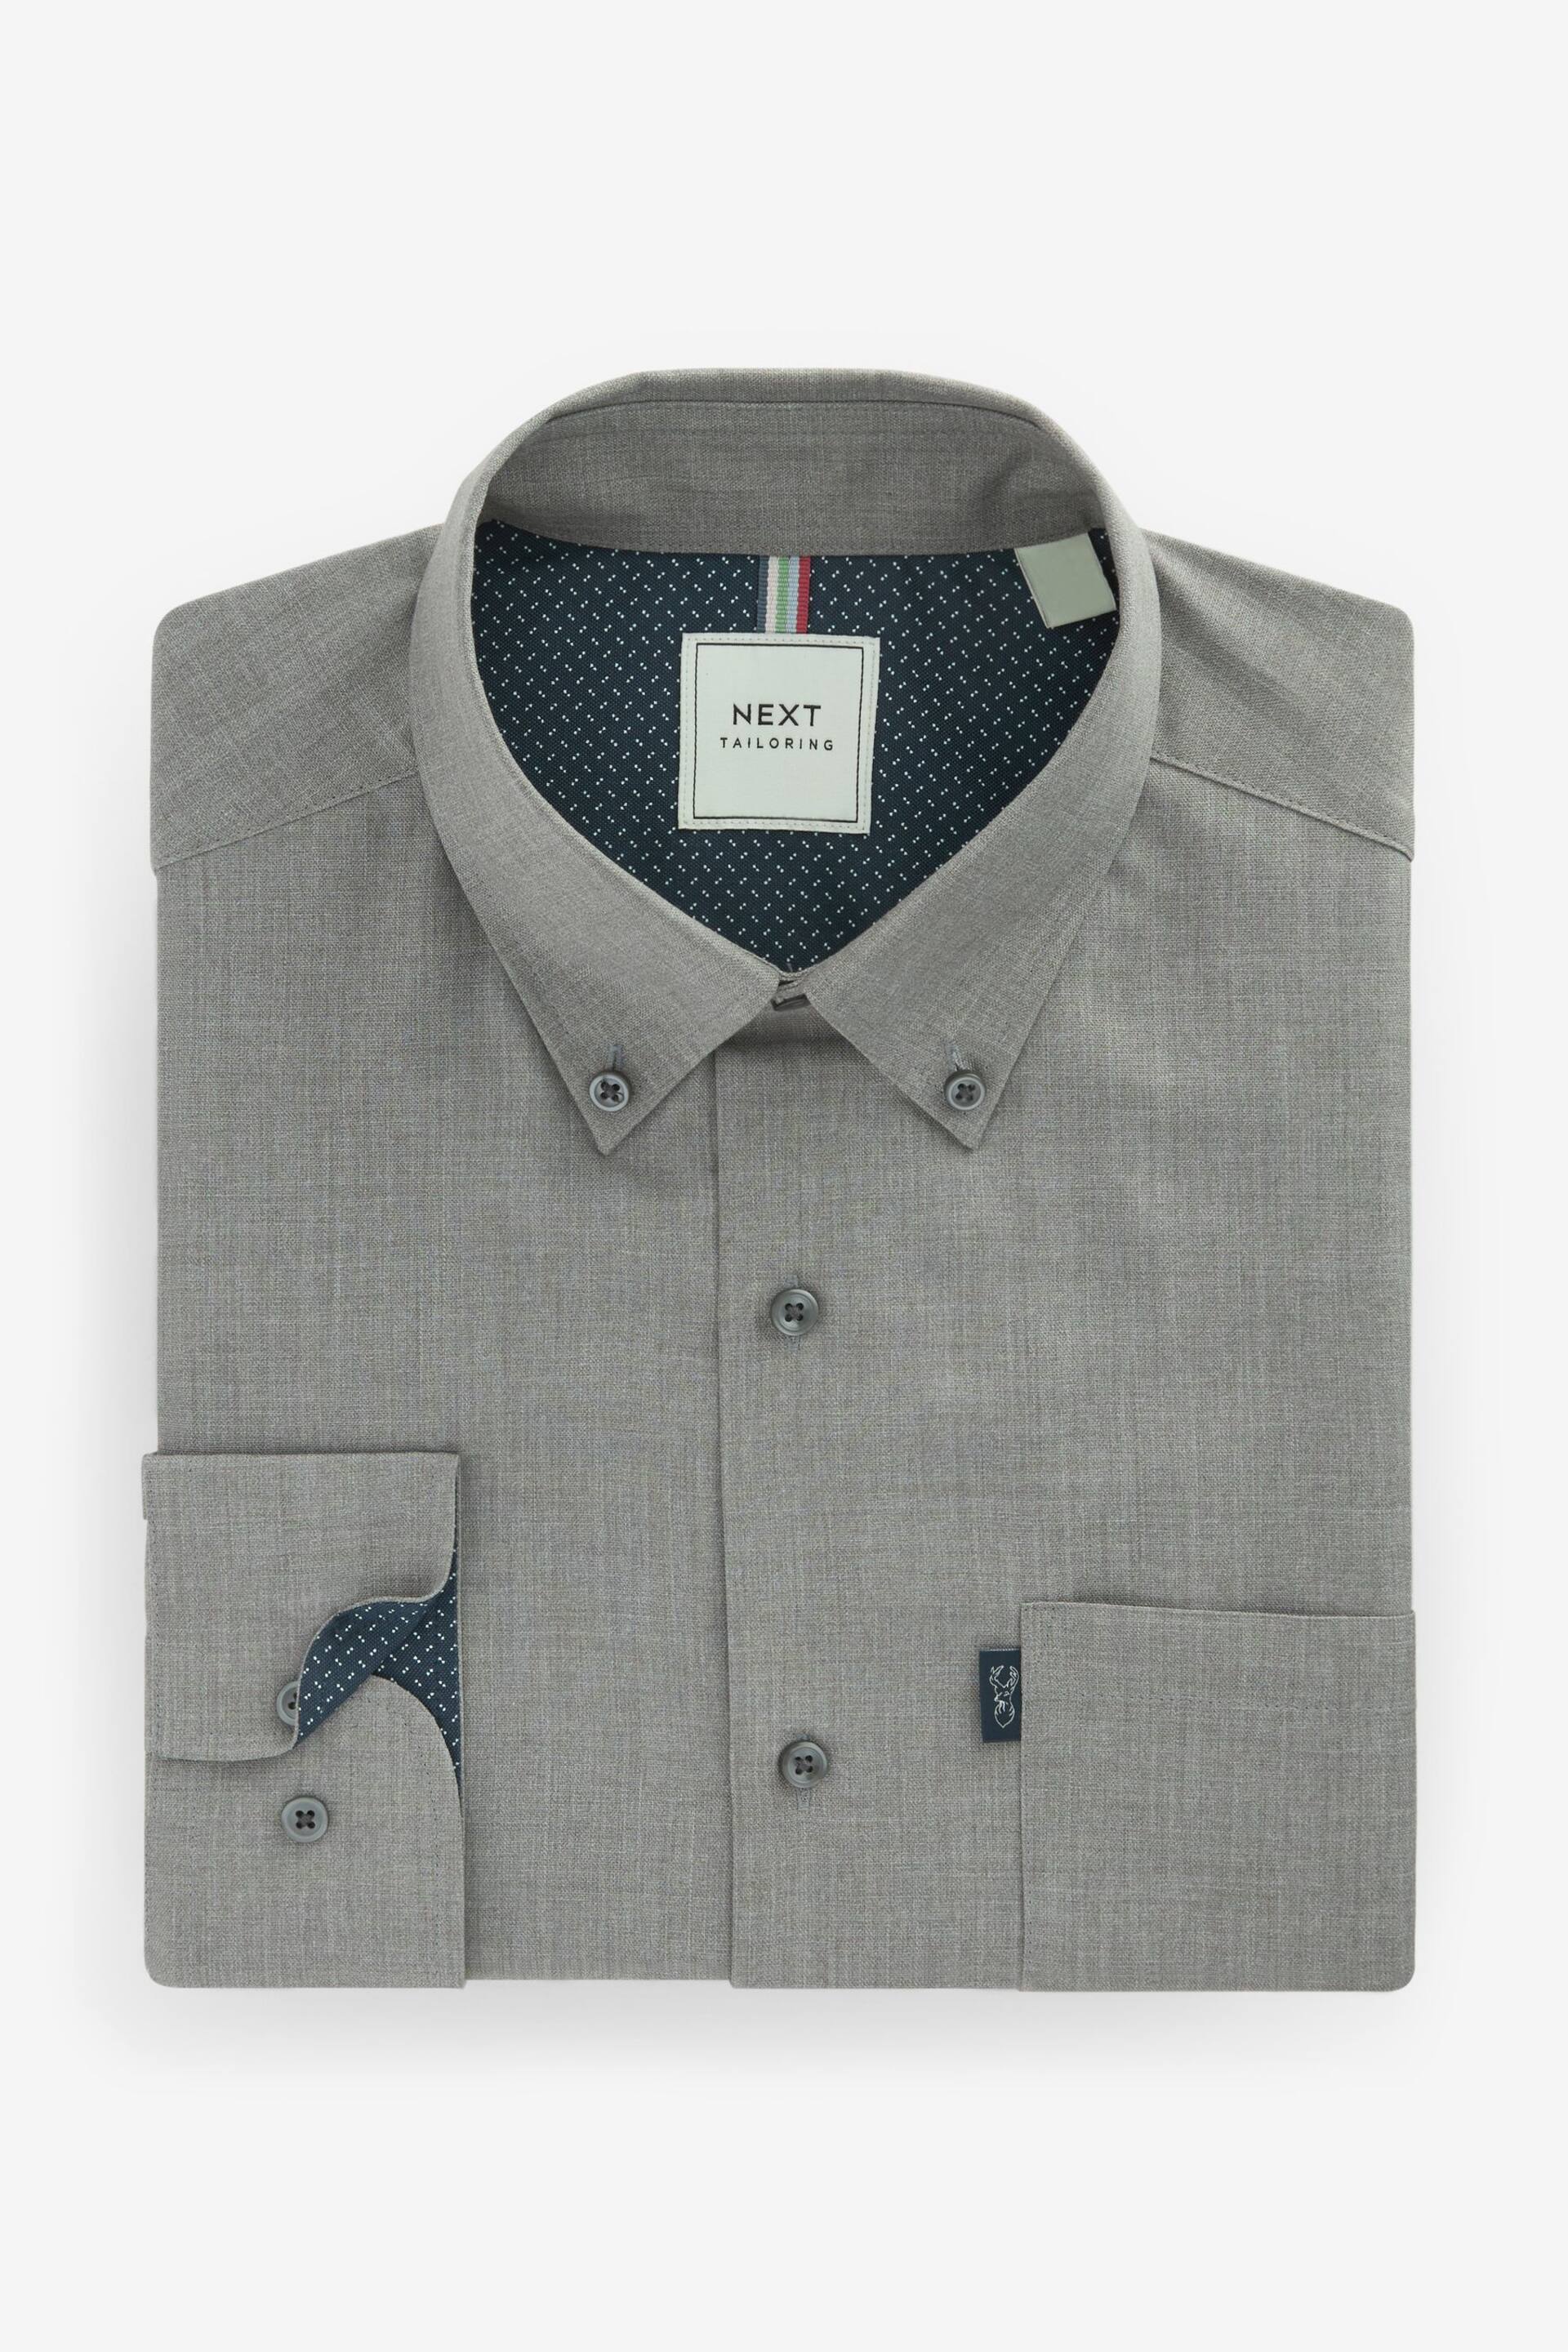 Grey Marl Regular Fit Easy Iron Button Down Oxford Shirt - Image 4 of 6